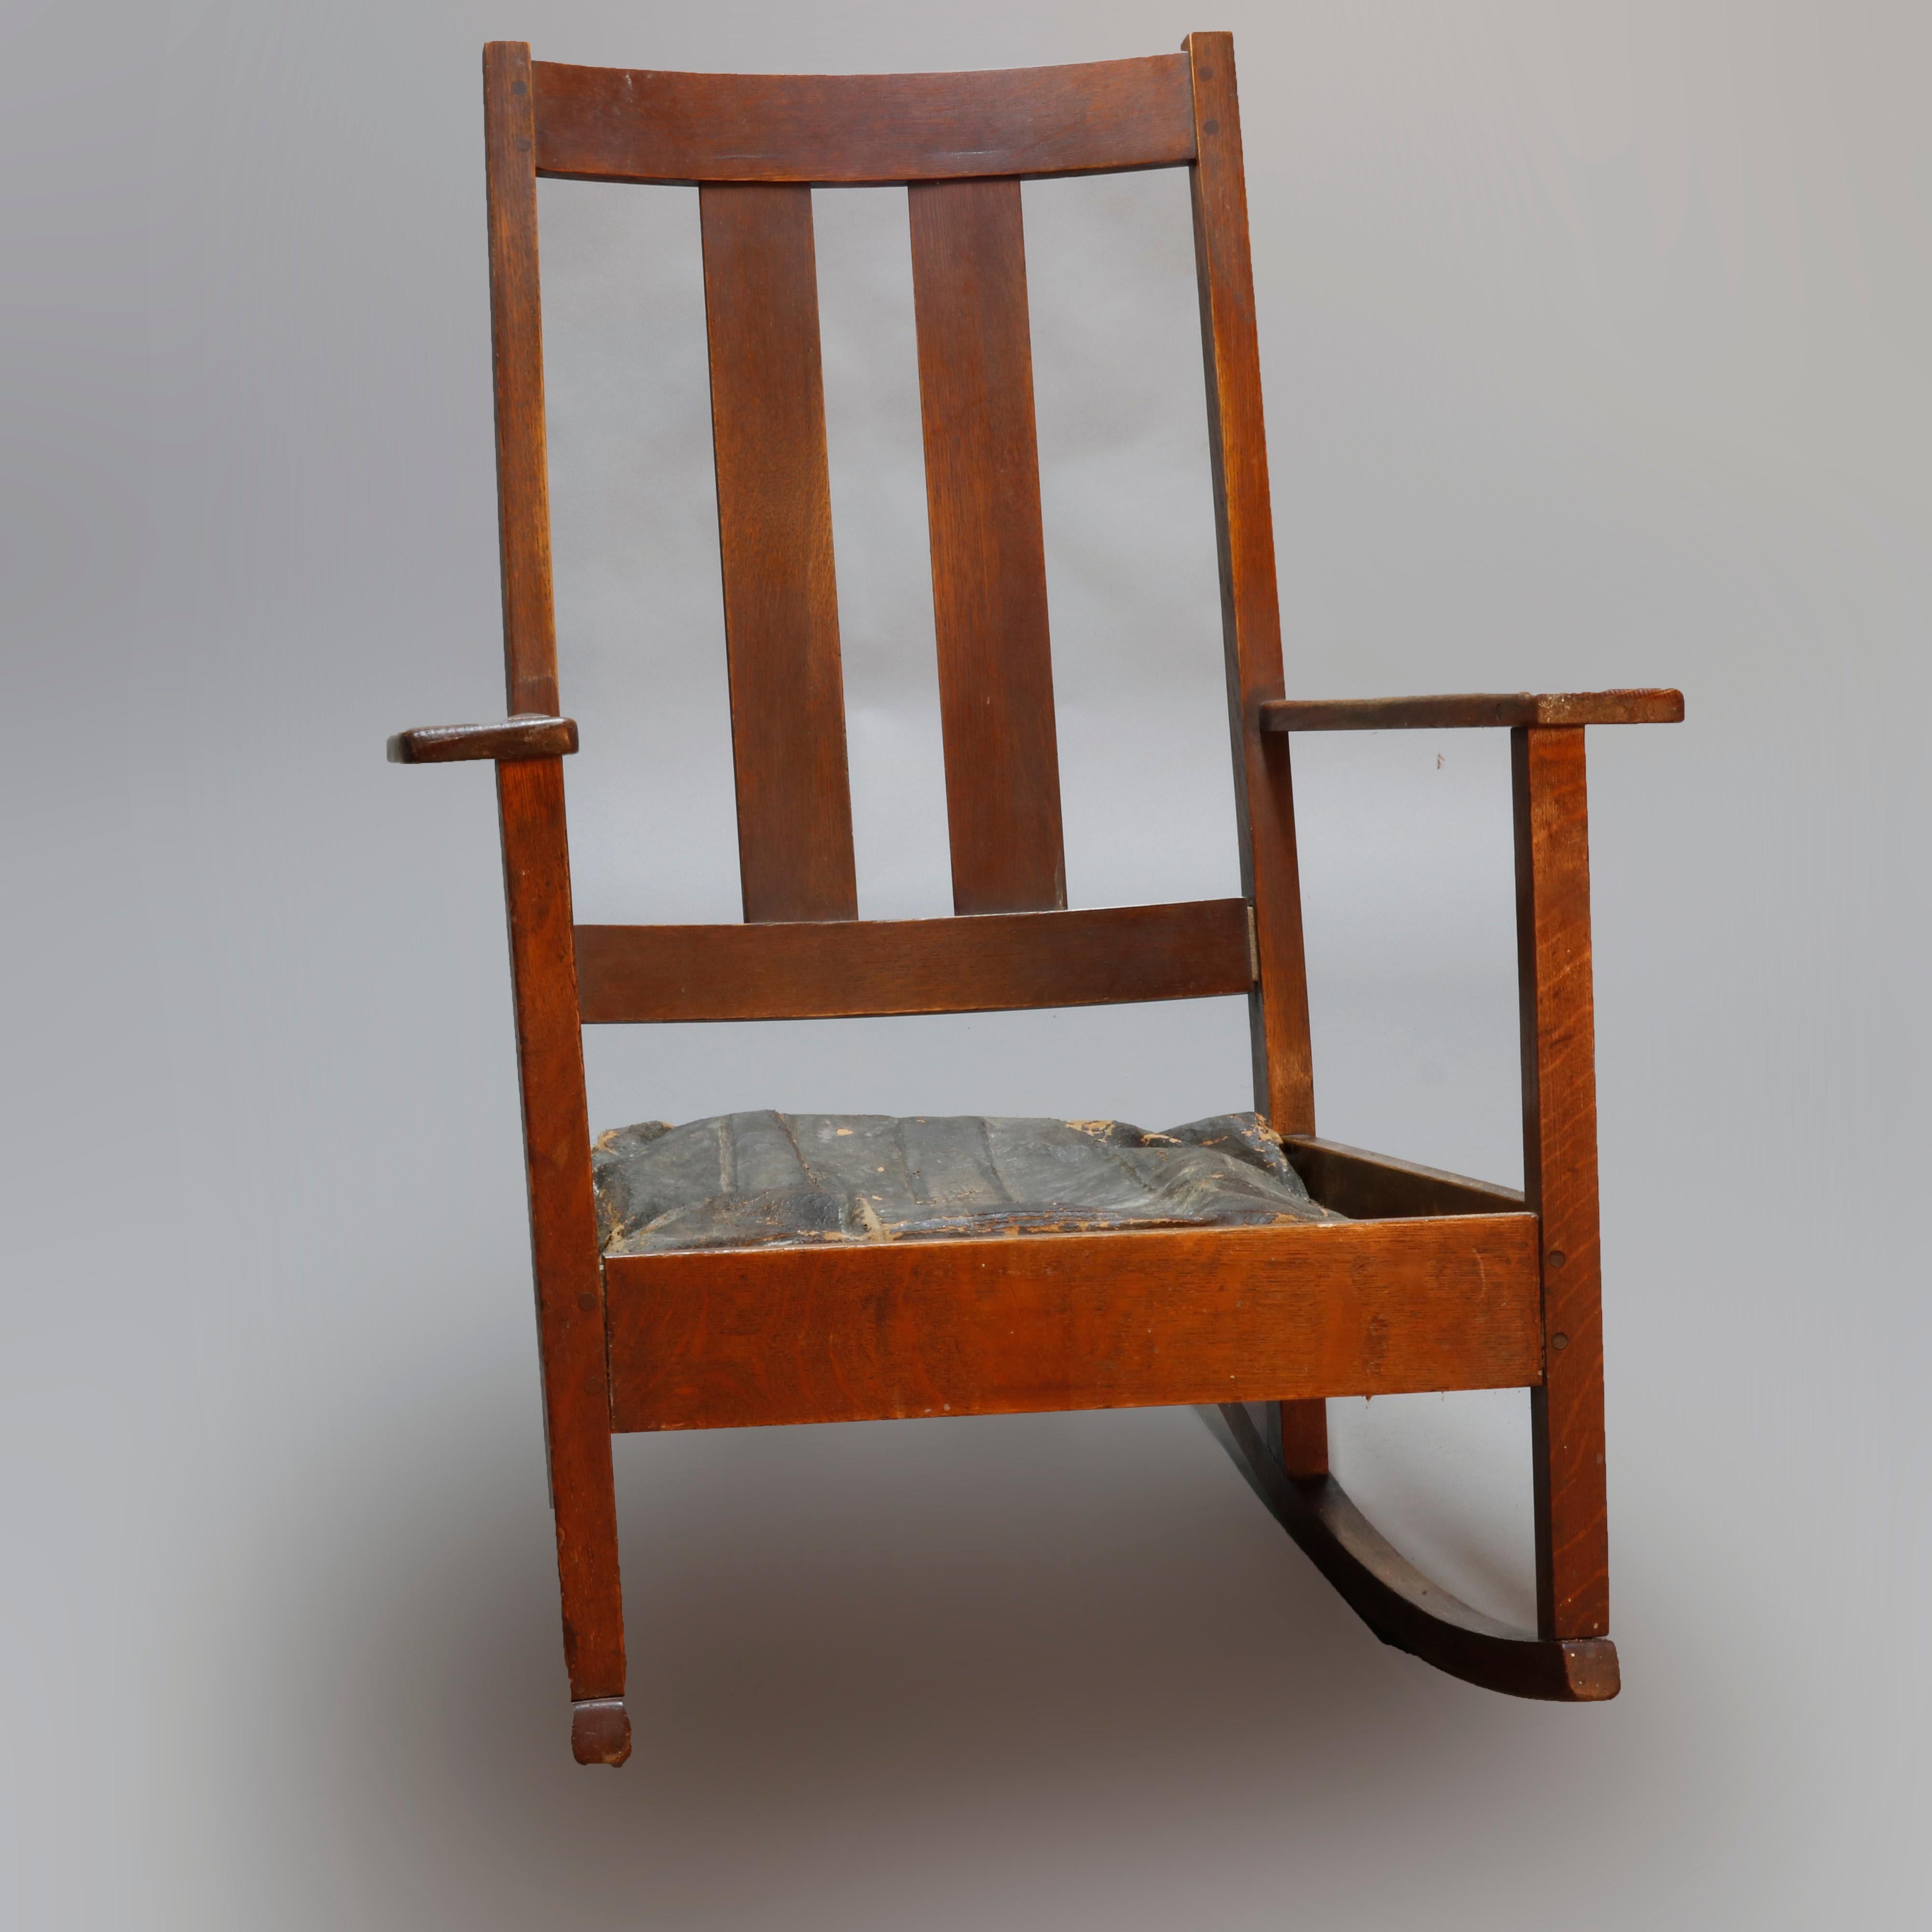 An antique Arts & Crafts Mission oak rocking chair by Limbert offers slat back and original maker label, circa 1910.

Measures: 40